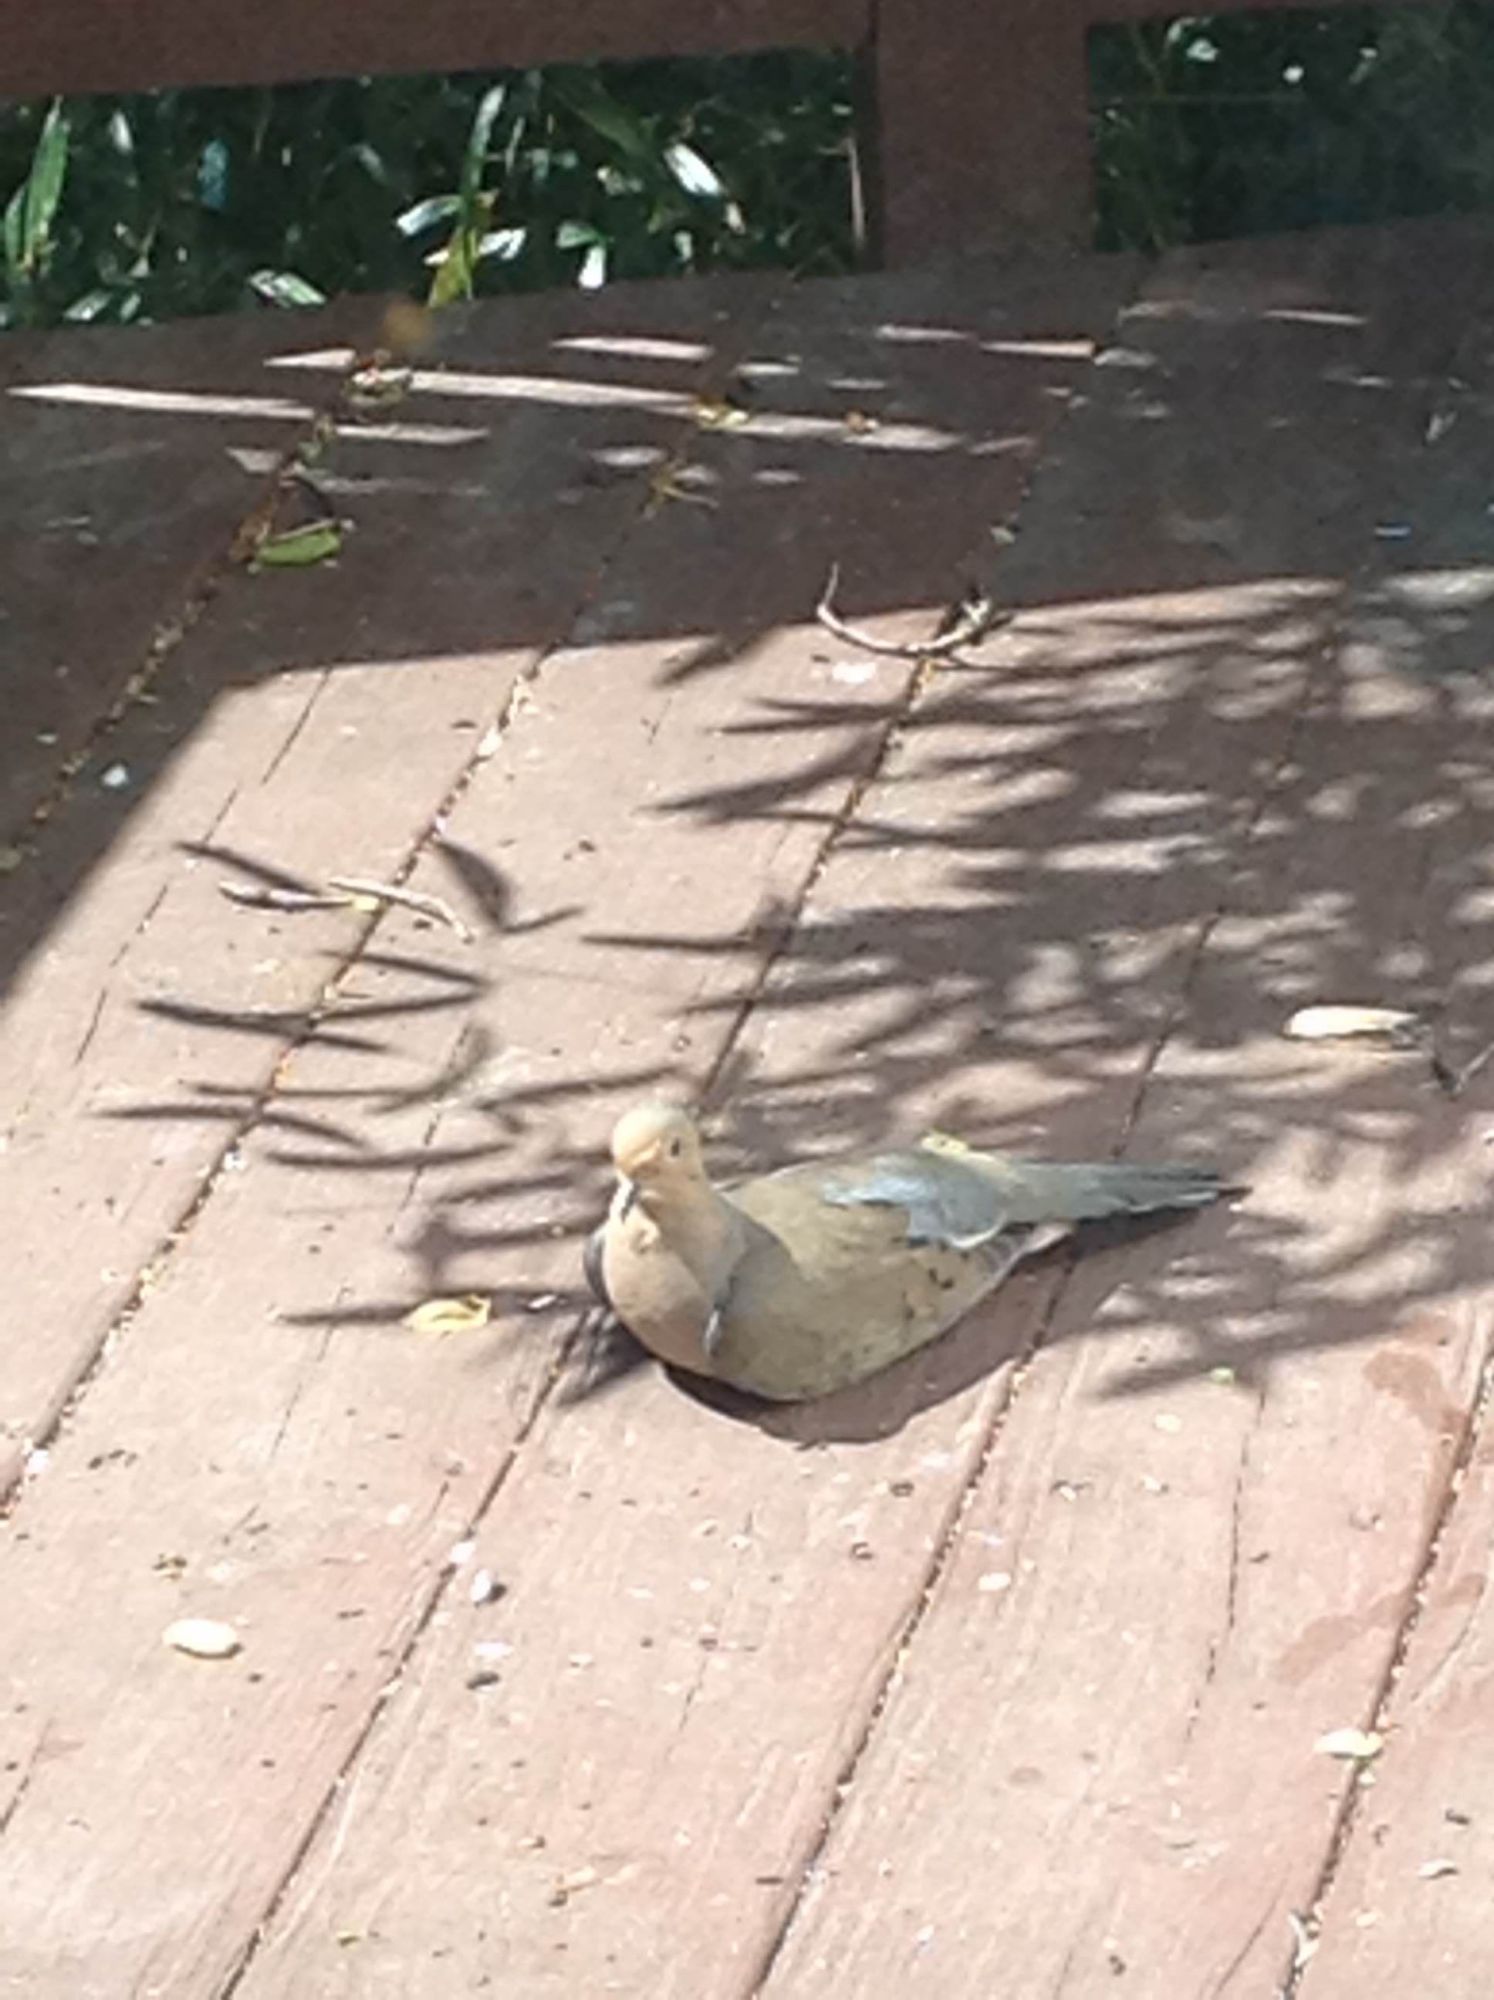 Look who sat down for a rest! (Don't worry, she's not injured. I watched her fly in and sit down.) My favorite little birdie~ <3 I even tried cooing at her- and we made eye contact for a little while!